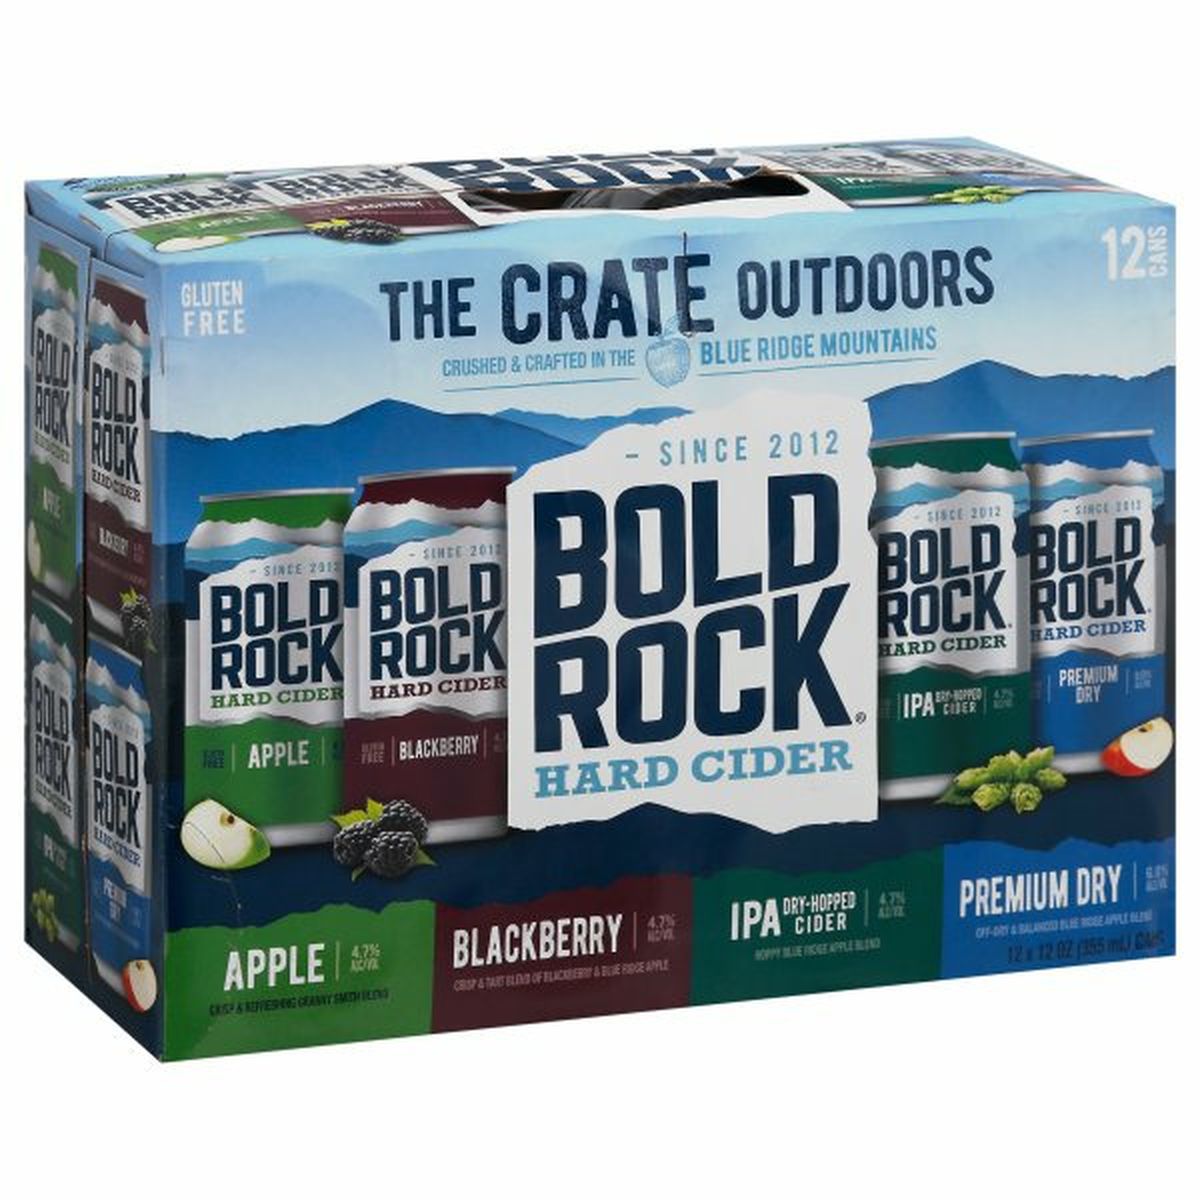 Calories in Bold Rock Variety Pack Hard Cider 12/12 oz cans